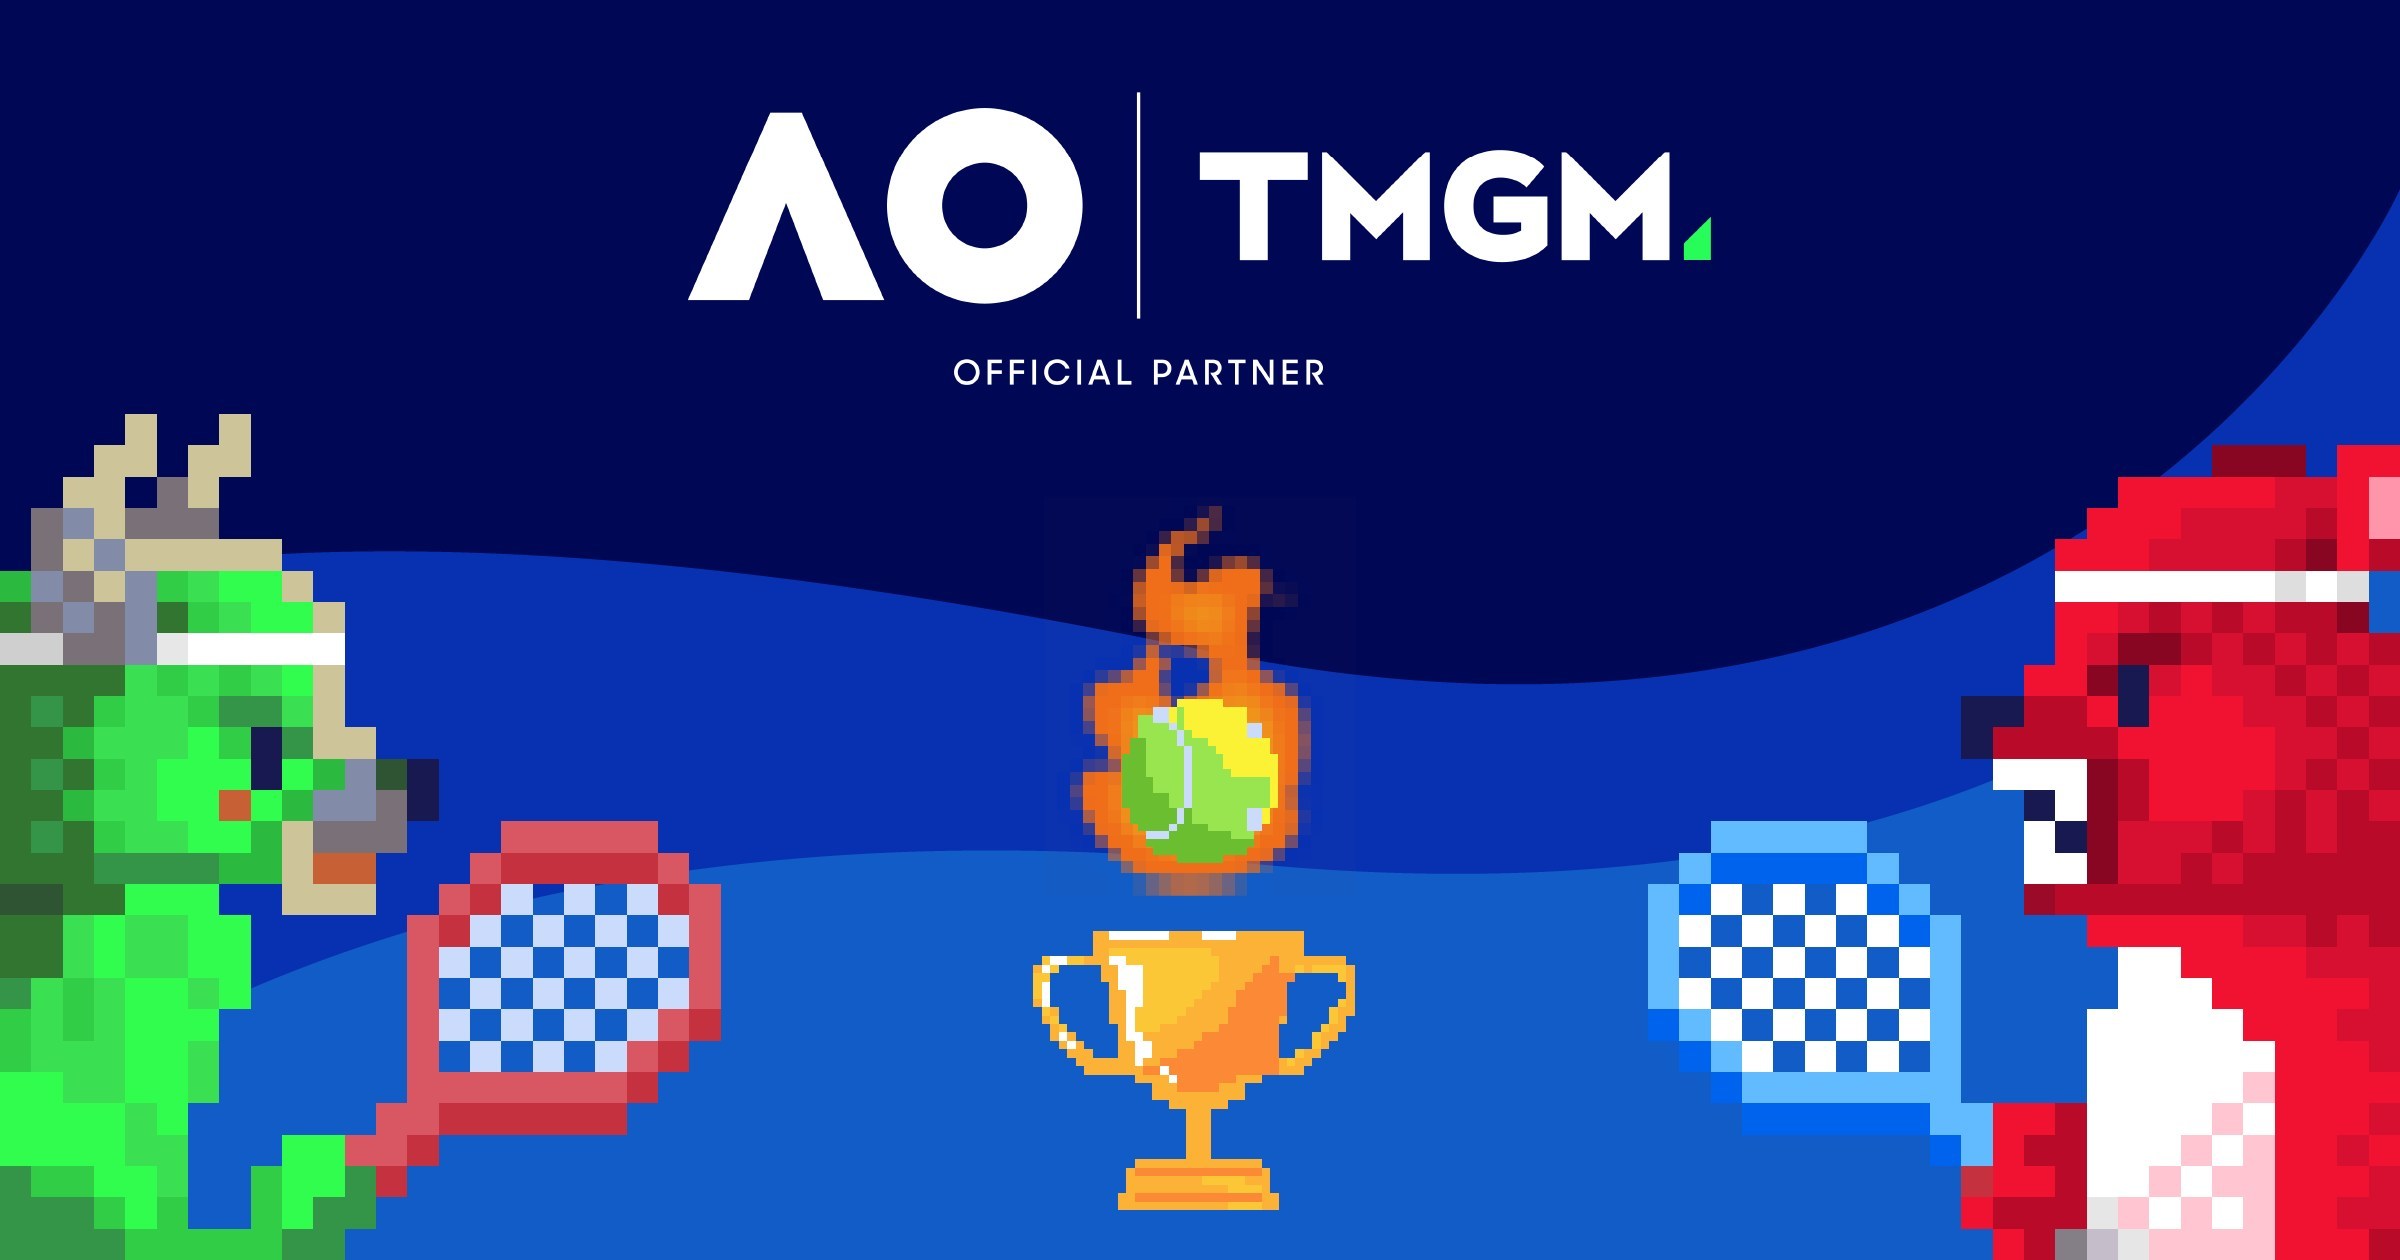 Play To Win Big Trading Bonuses: TMGM, Official Of The Australian Open, Launches Online Game Competition - Newswire APAC